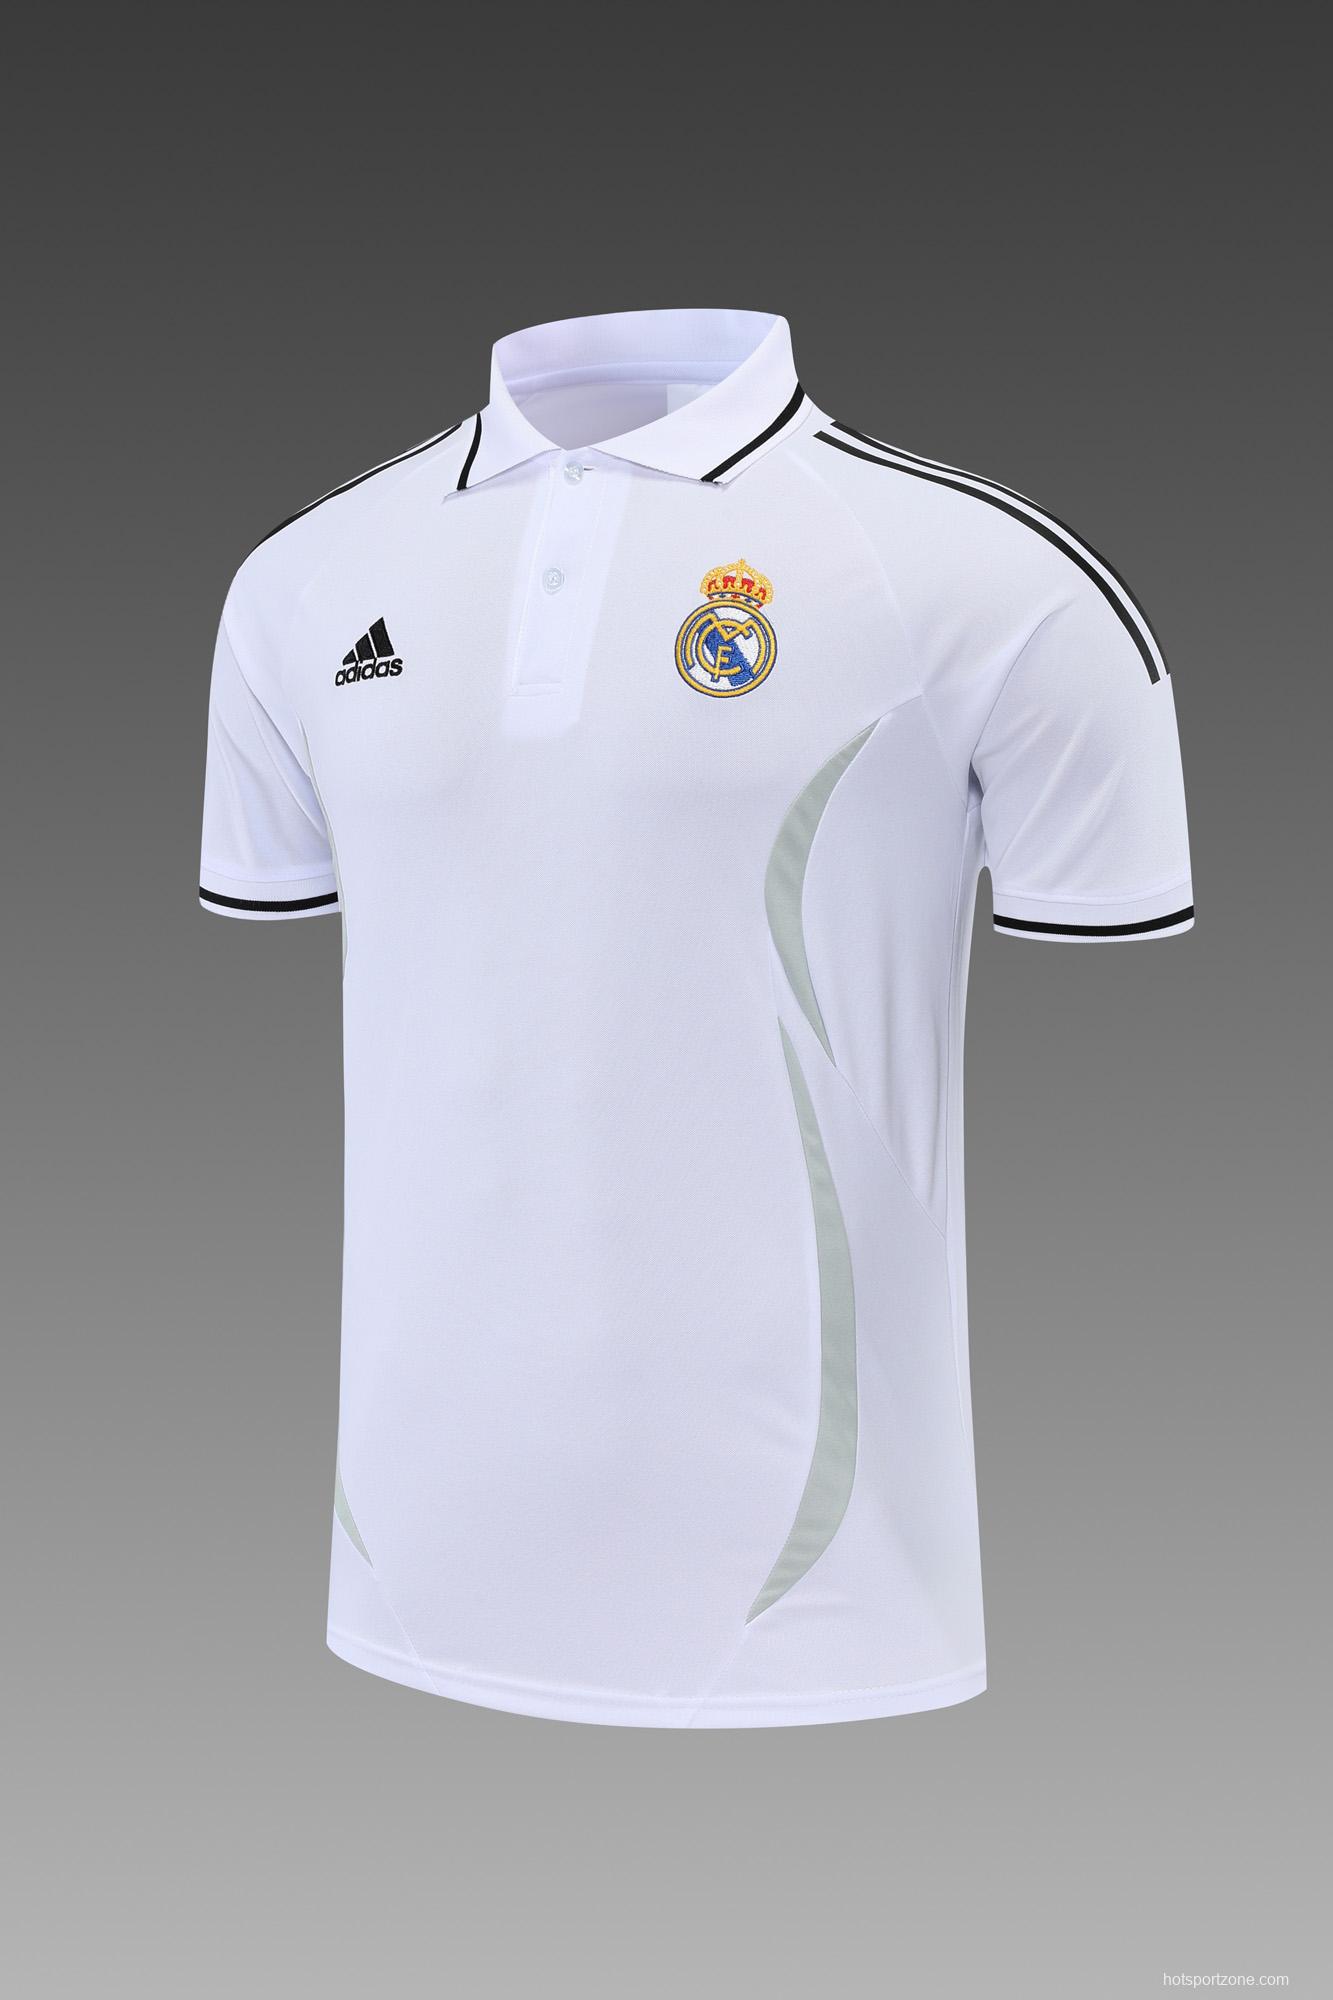 Real Madrid POLO kit white (not sold separately)